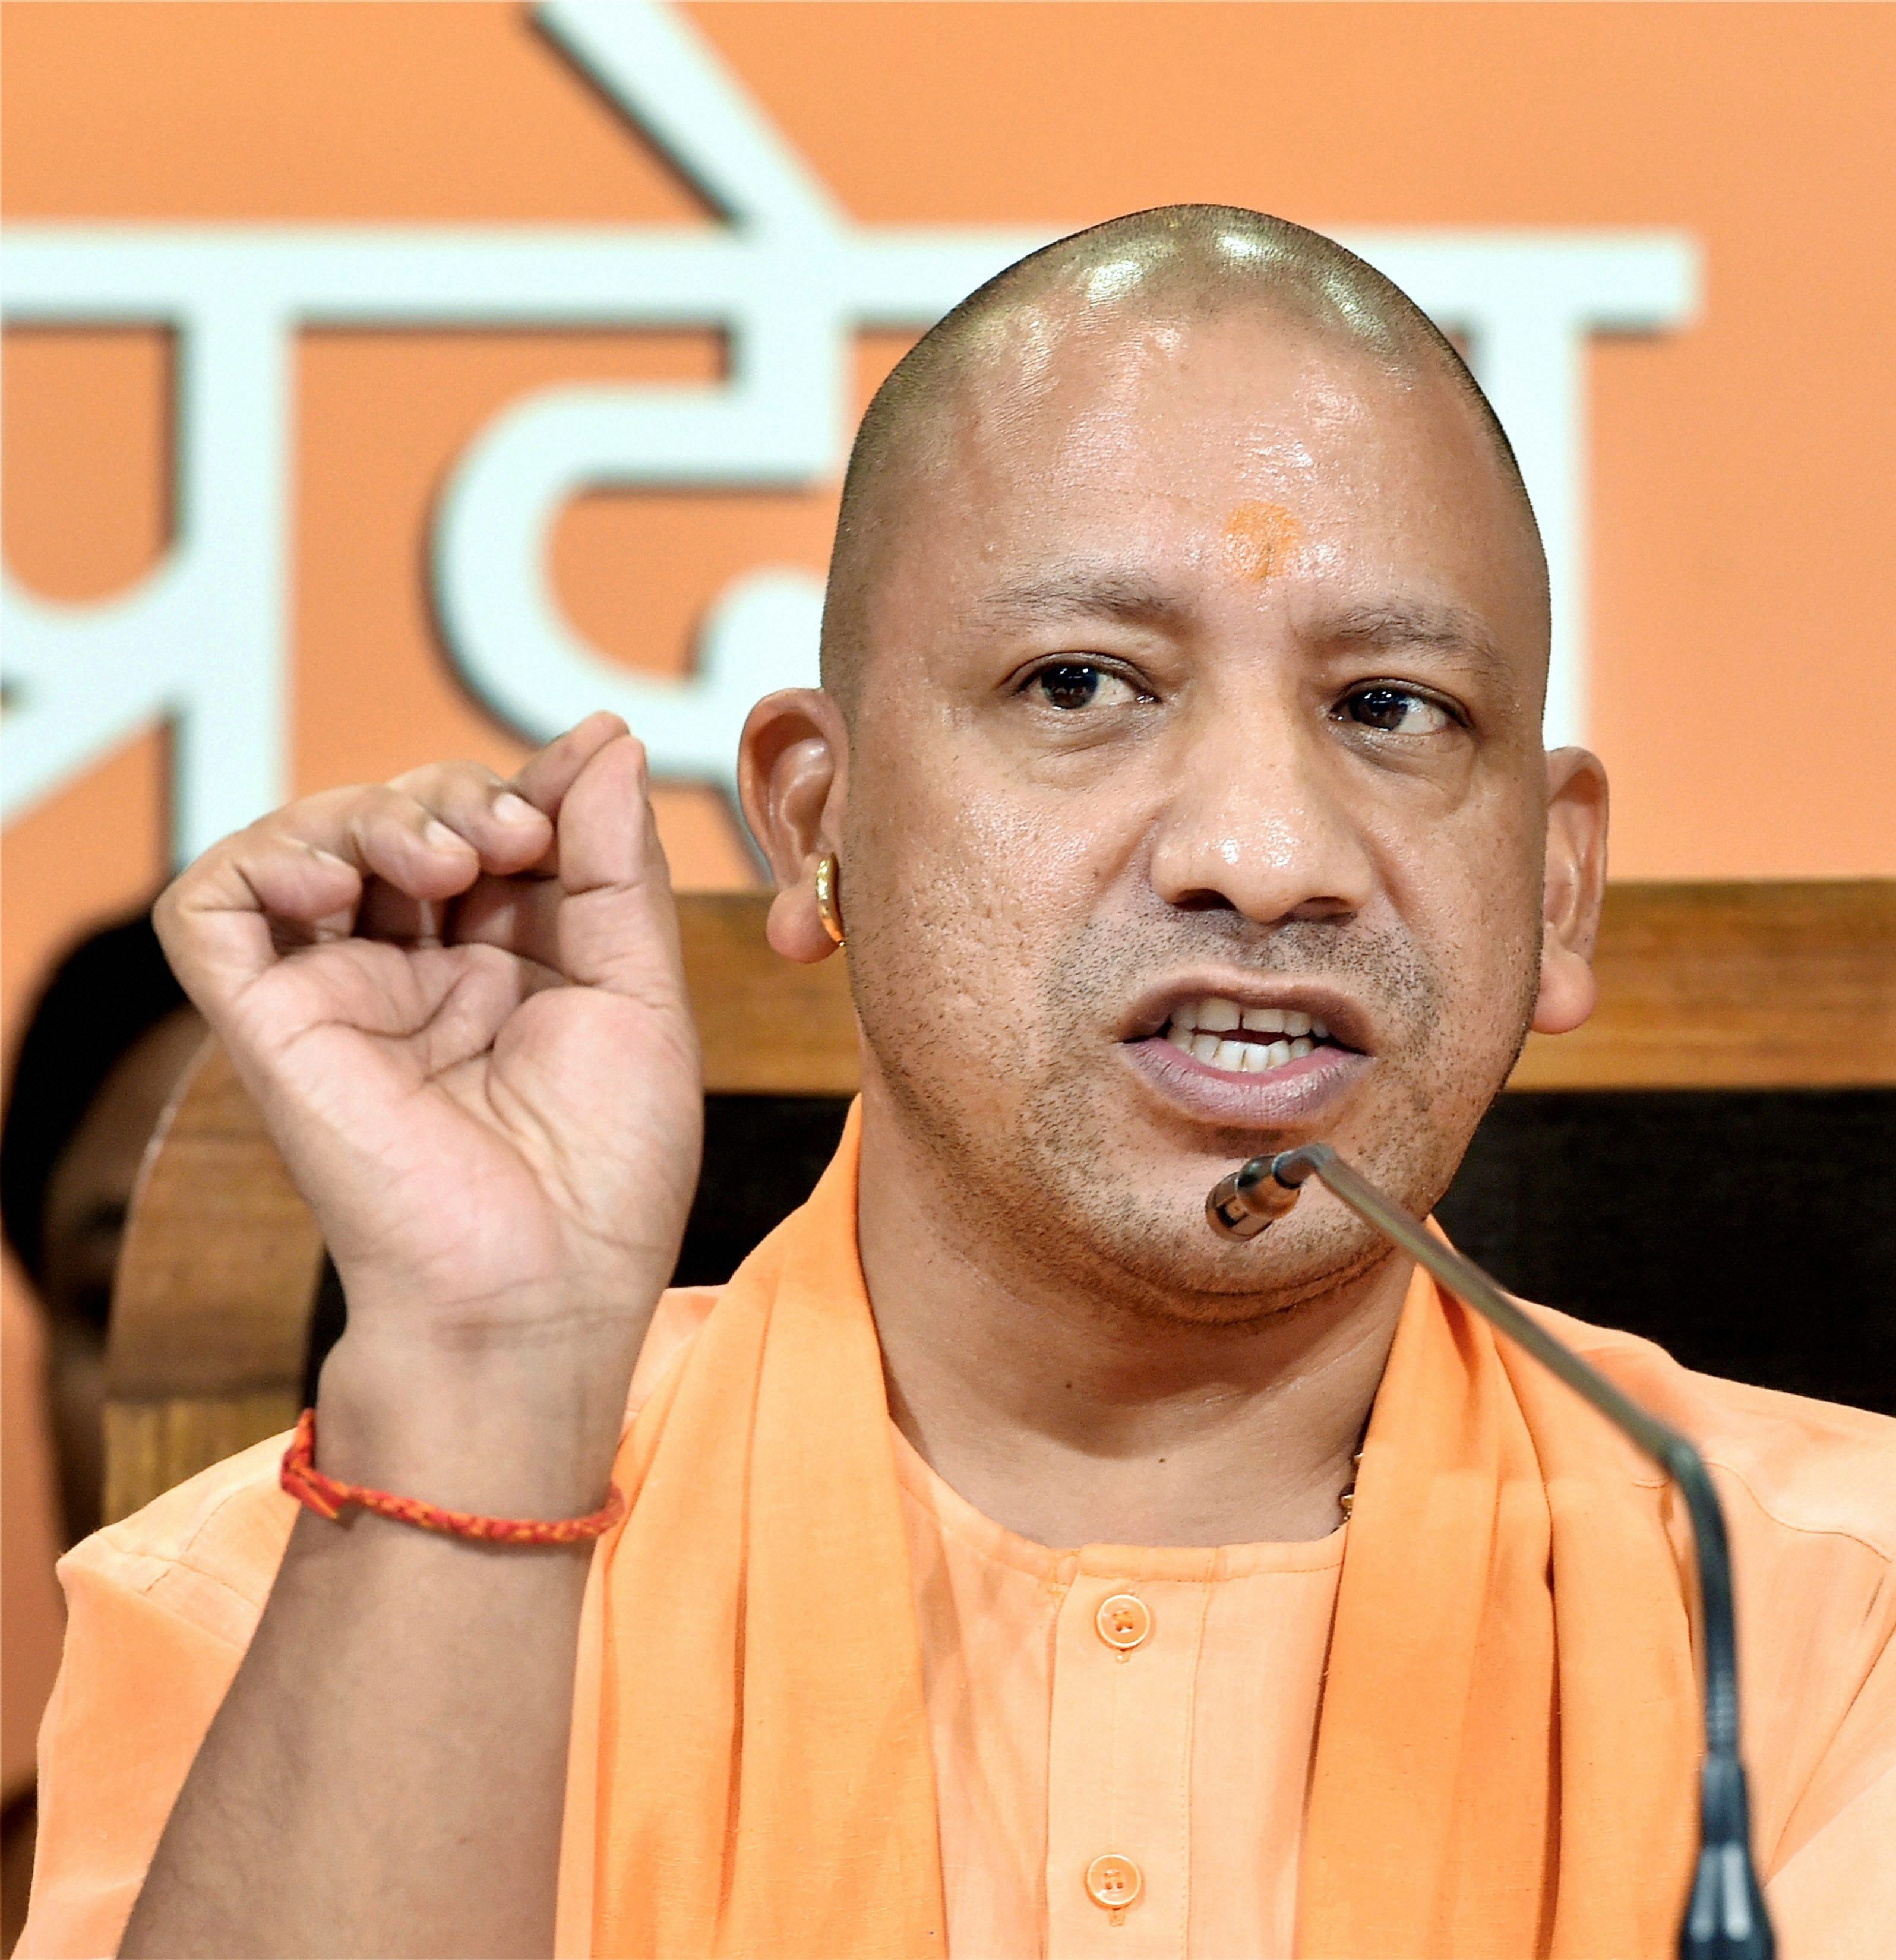 The Kairana LS seat and Noorpur Assembly seat elections will test the popularity of Uttar Pradesh Chief Minister Yogi Adityanath.